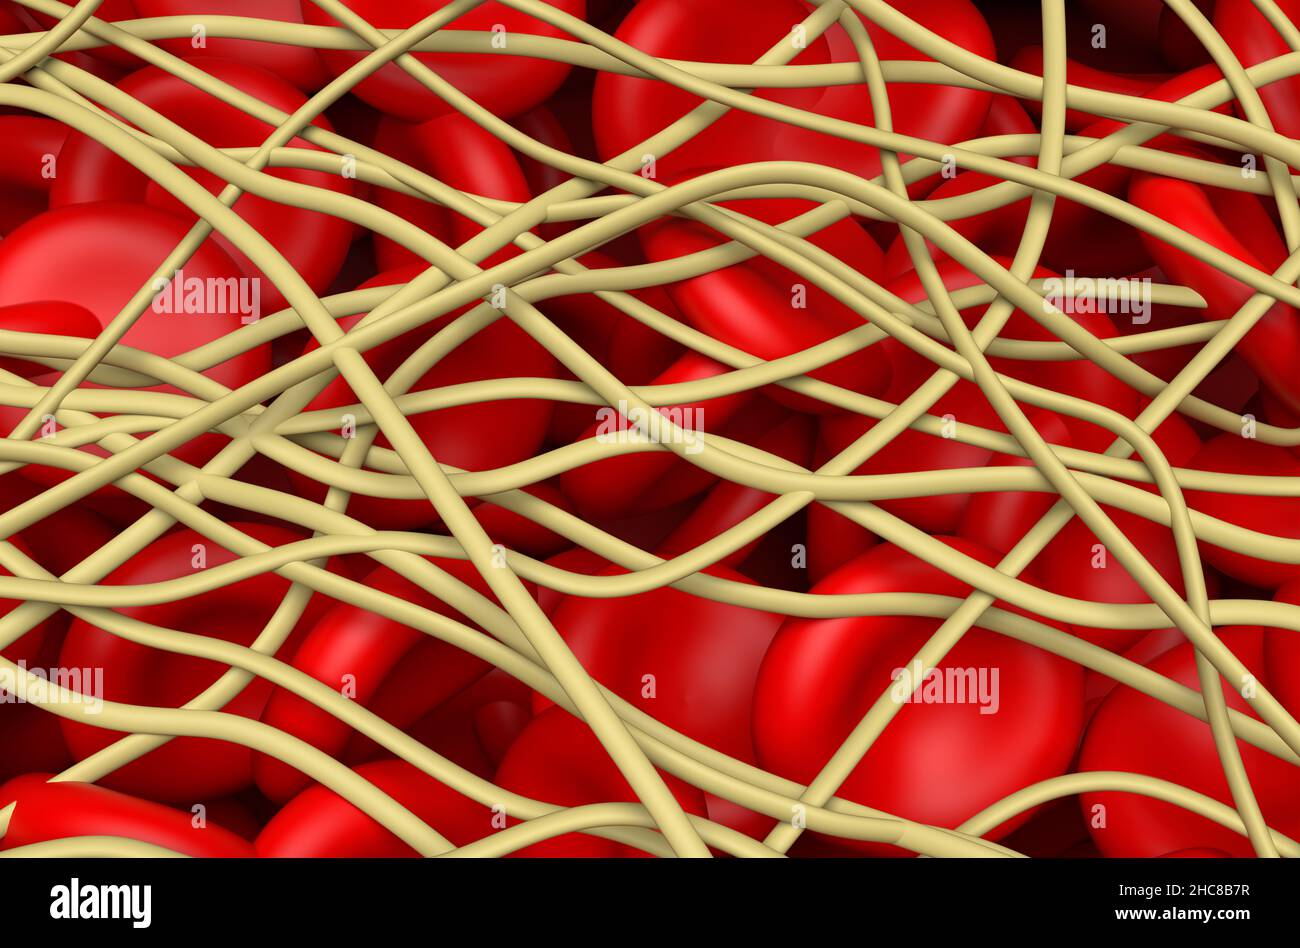 Blood clot. The red blood cells are trapped in filaments of fibrin protein. Isometric view 3d illustration Stock Photo